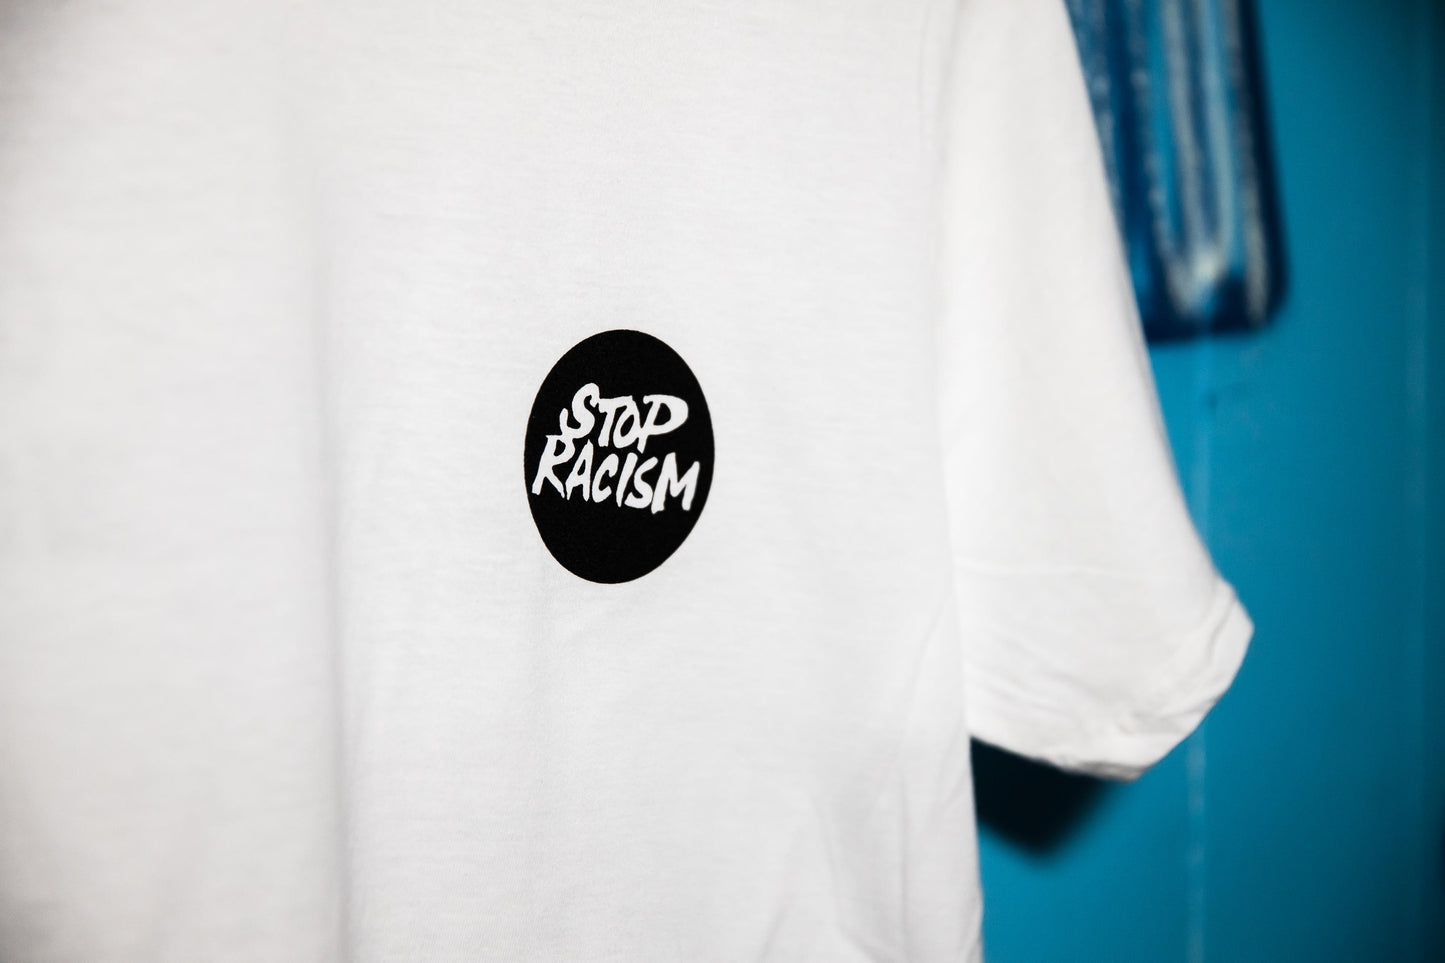 Stop Racism t-shirt (White) designed by Paul Camo